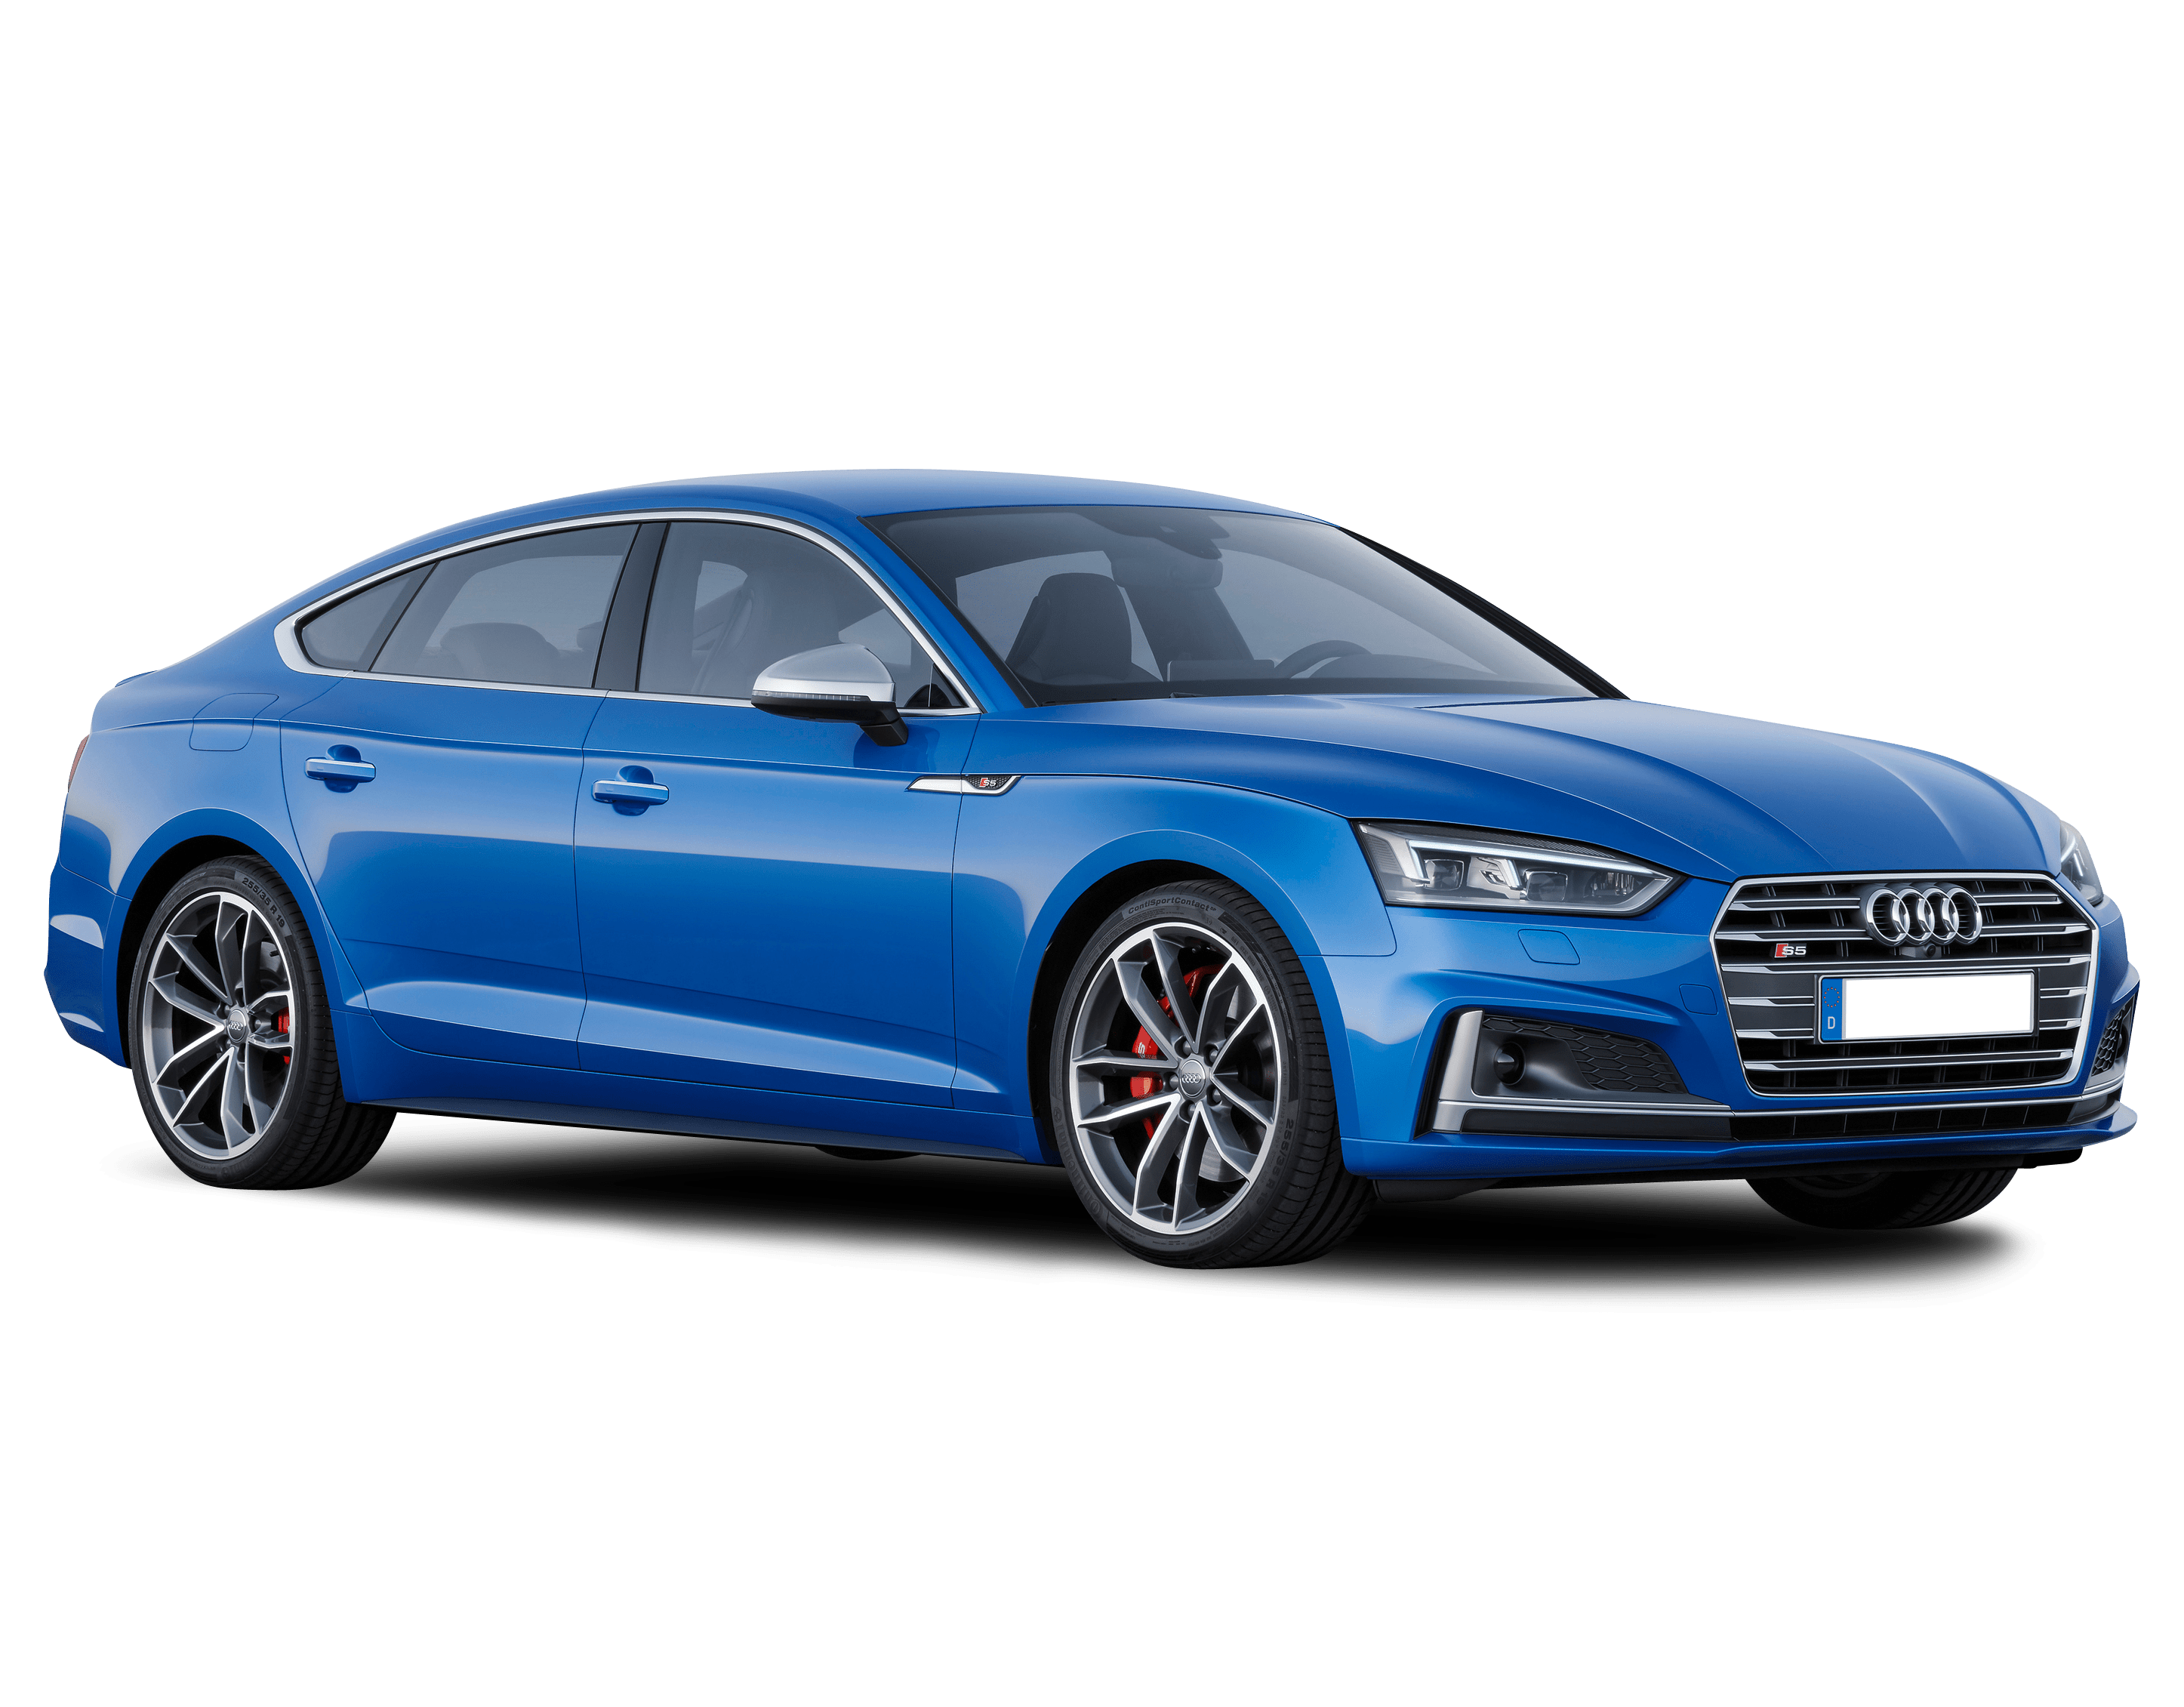 https://carsguide-res.cloudinary.com/image/upload/f_auto,fl_lossy,q_auto,t_default/v1/editorial/vhs/Audi-S5.png